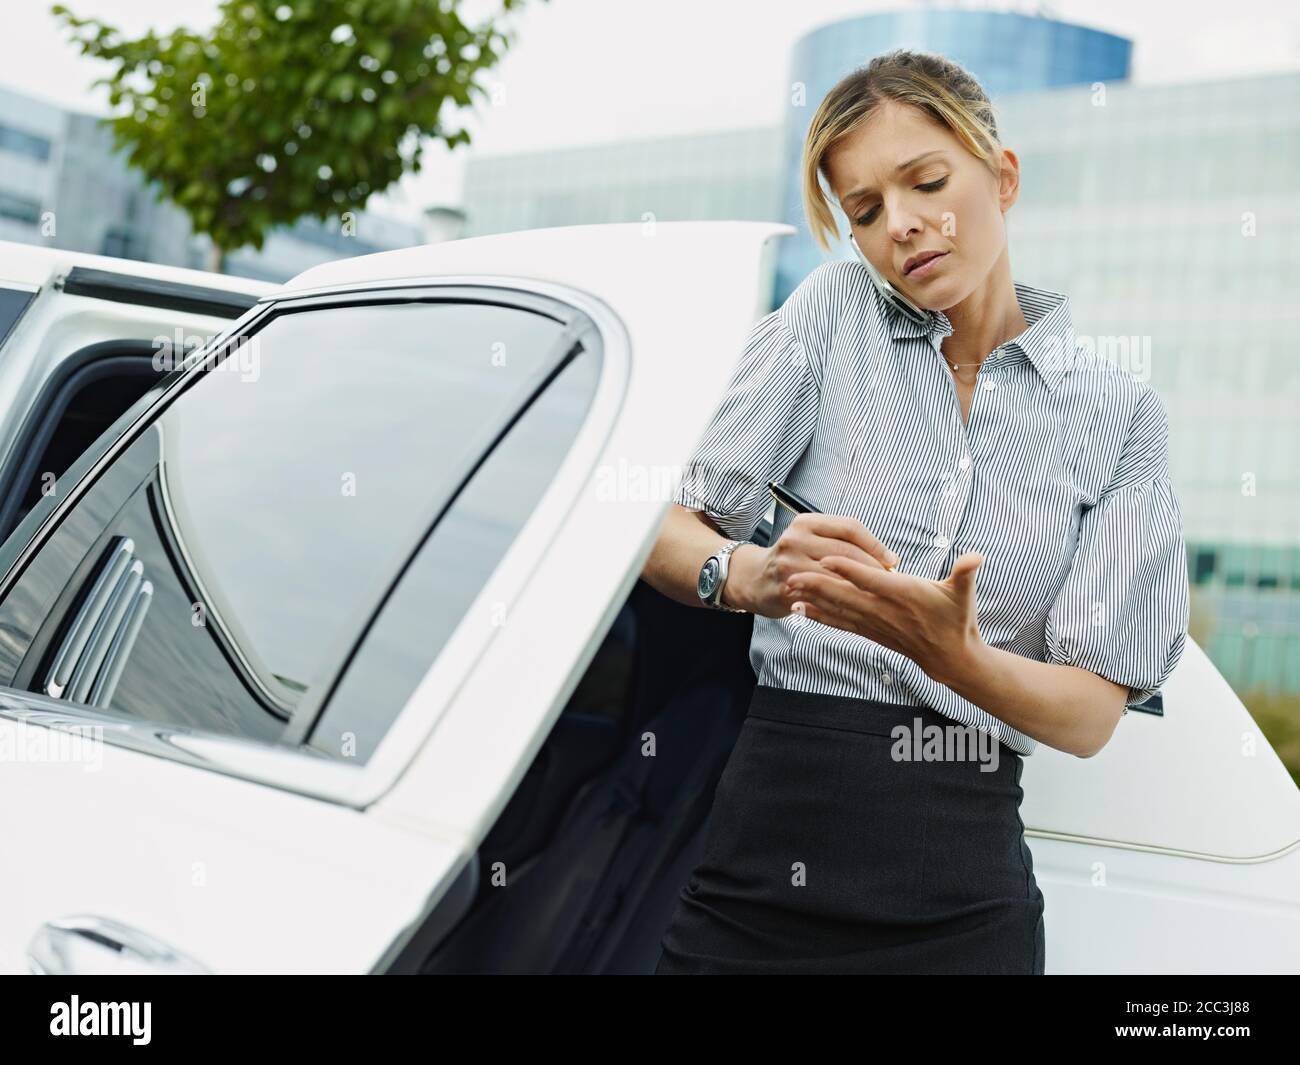 Businesswoman Takes Notes On Palm Of Hand During Phone Call Stock Photo